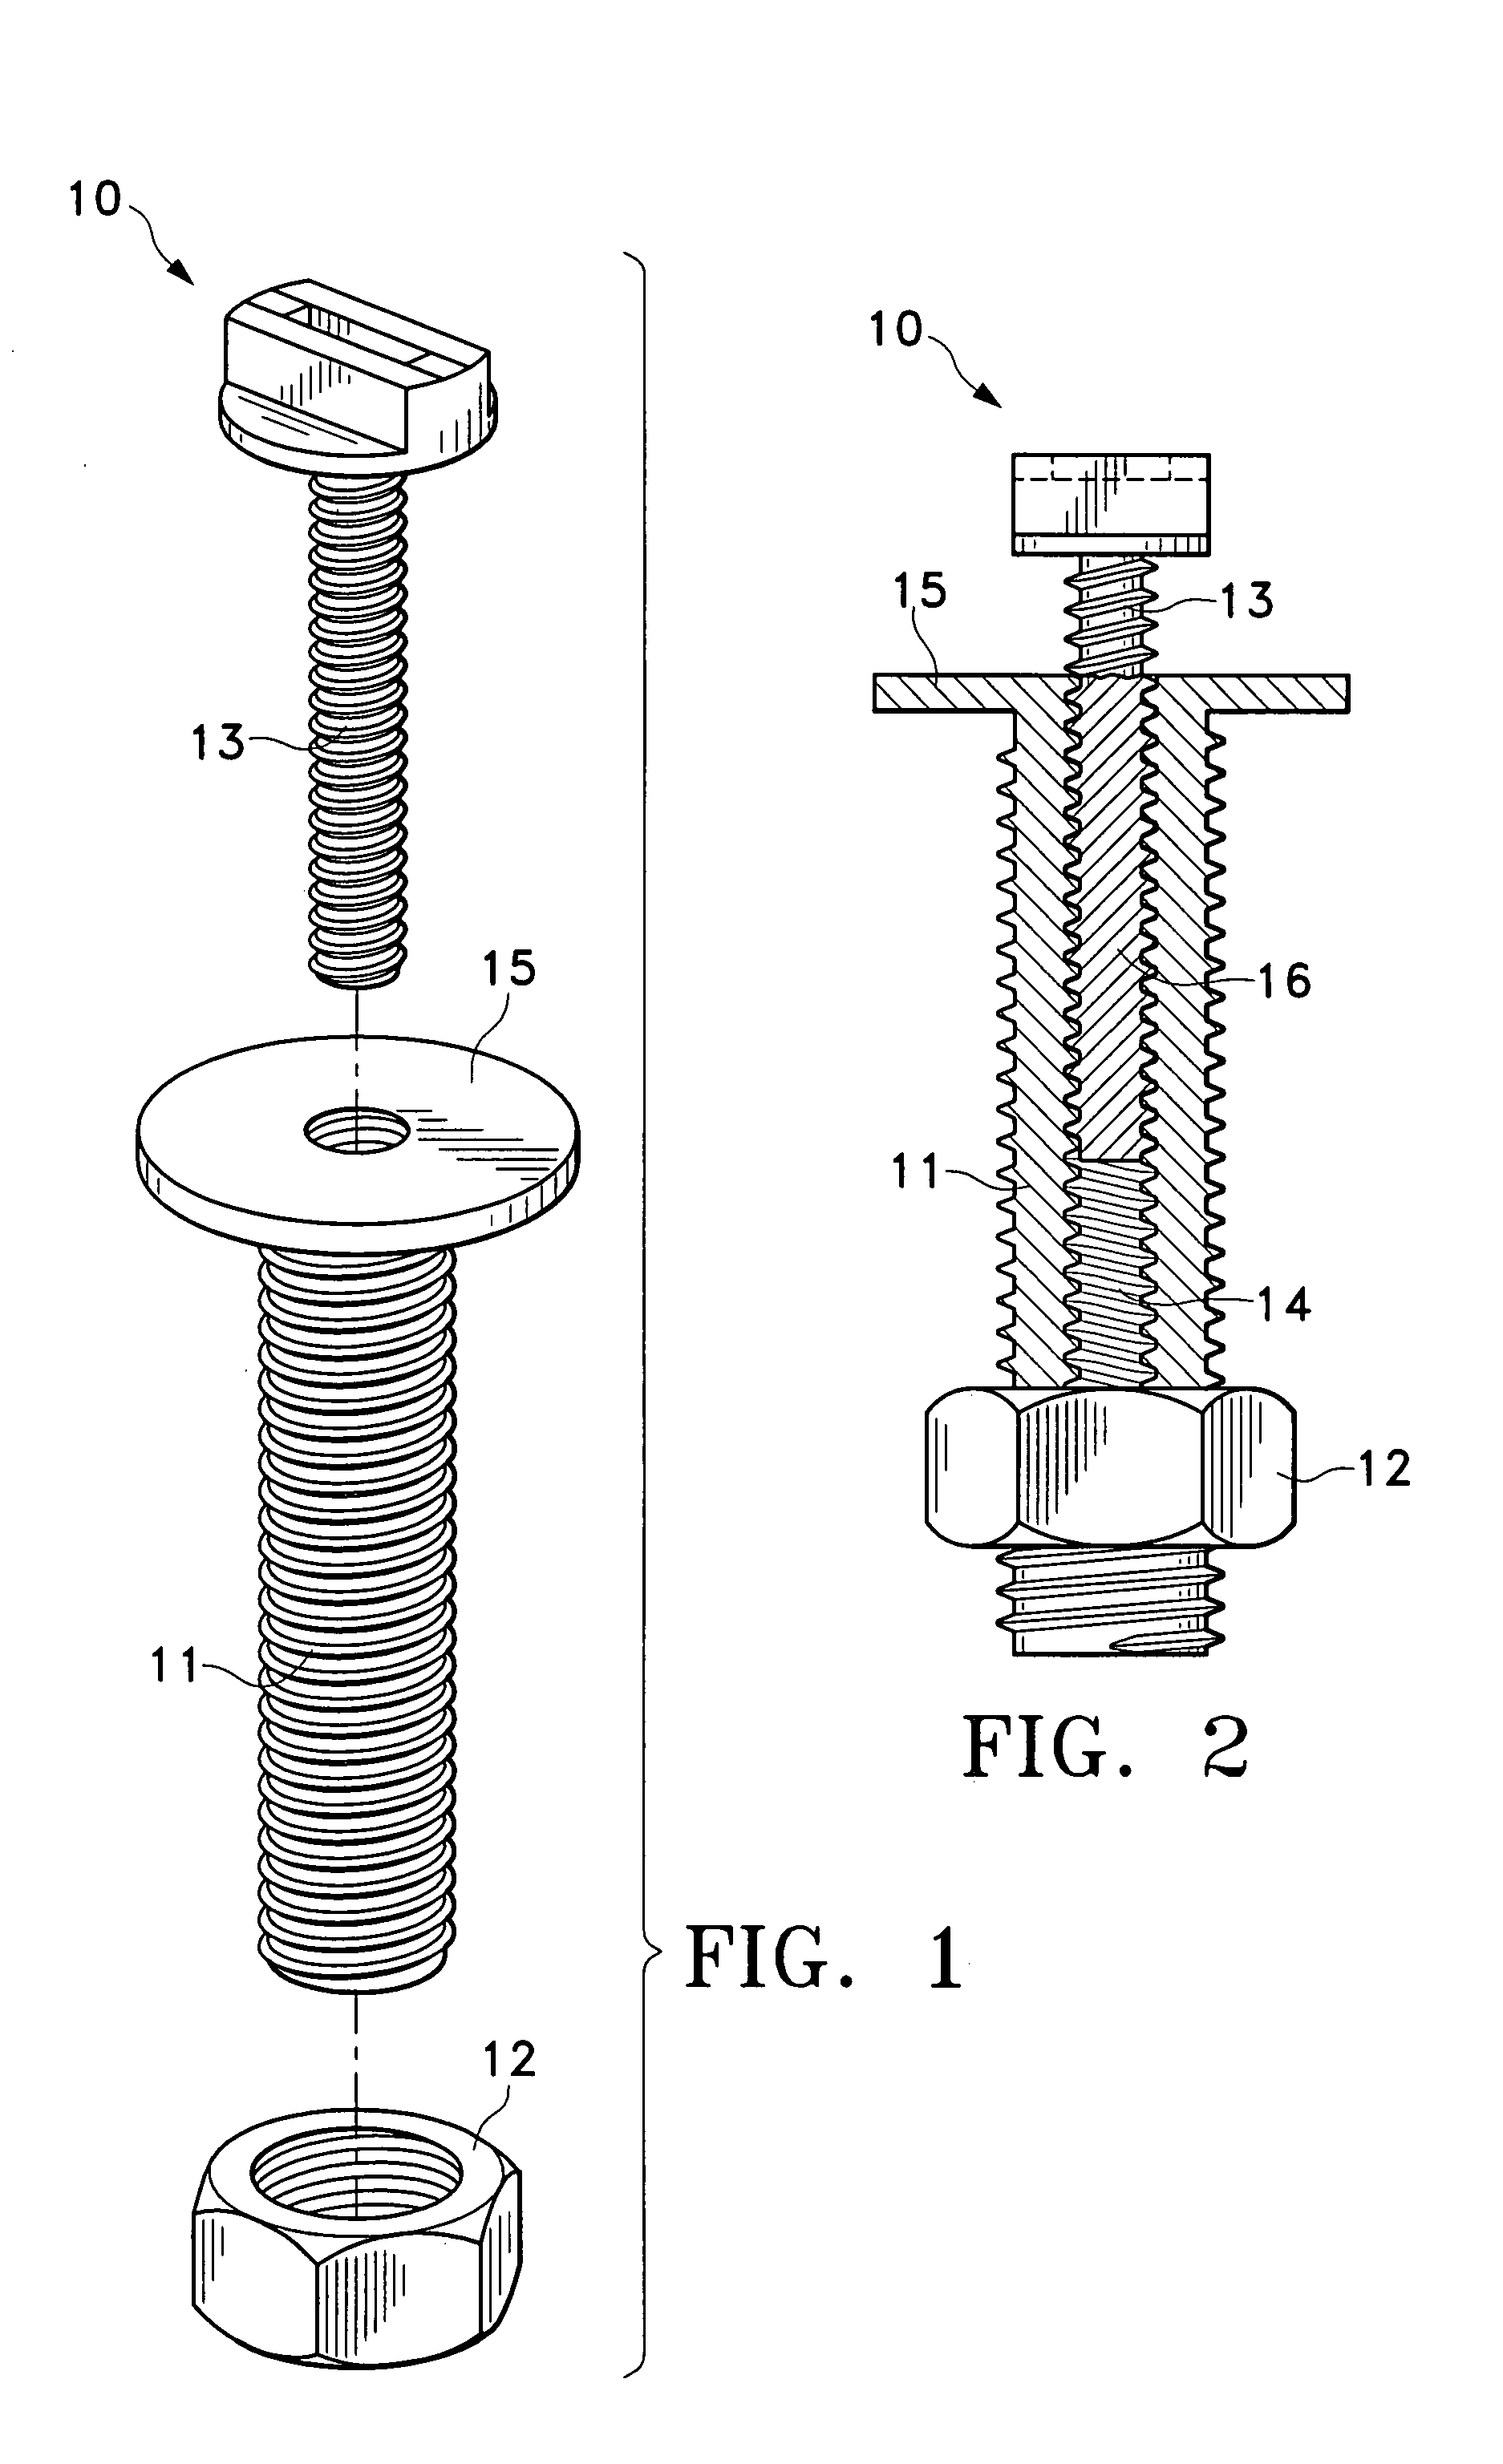 Bolt assembly for the attachment of toilet seats and other articles